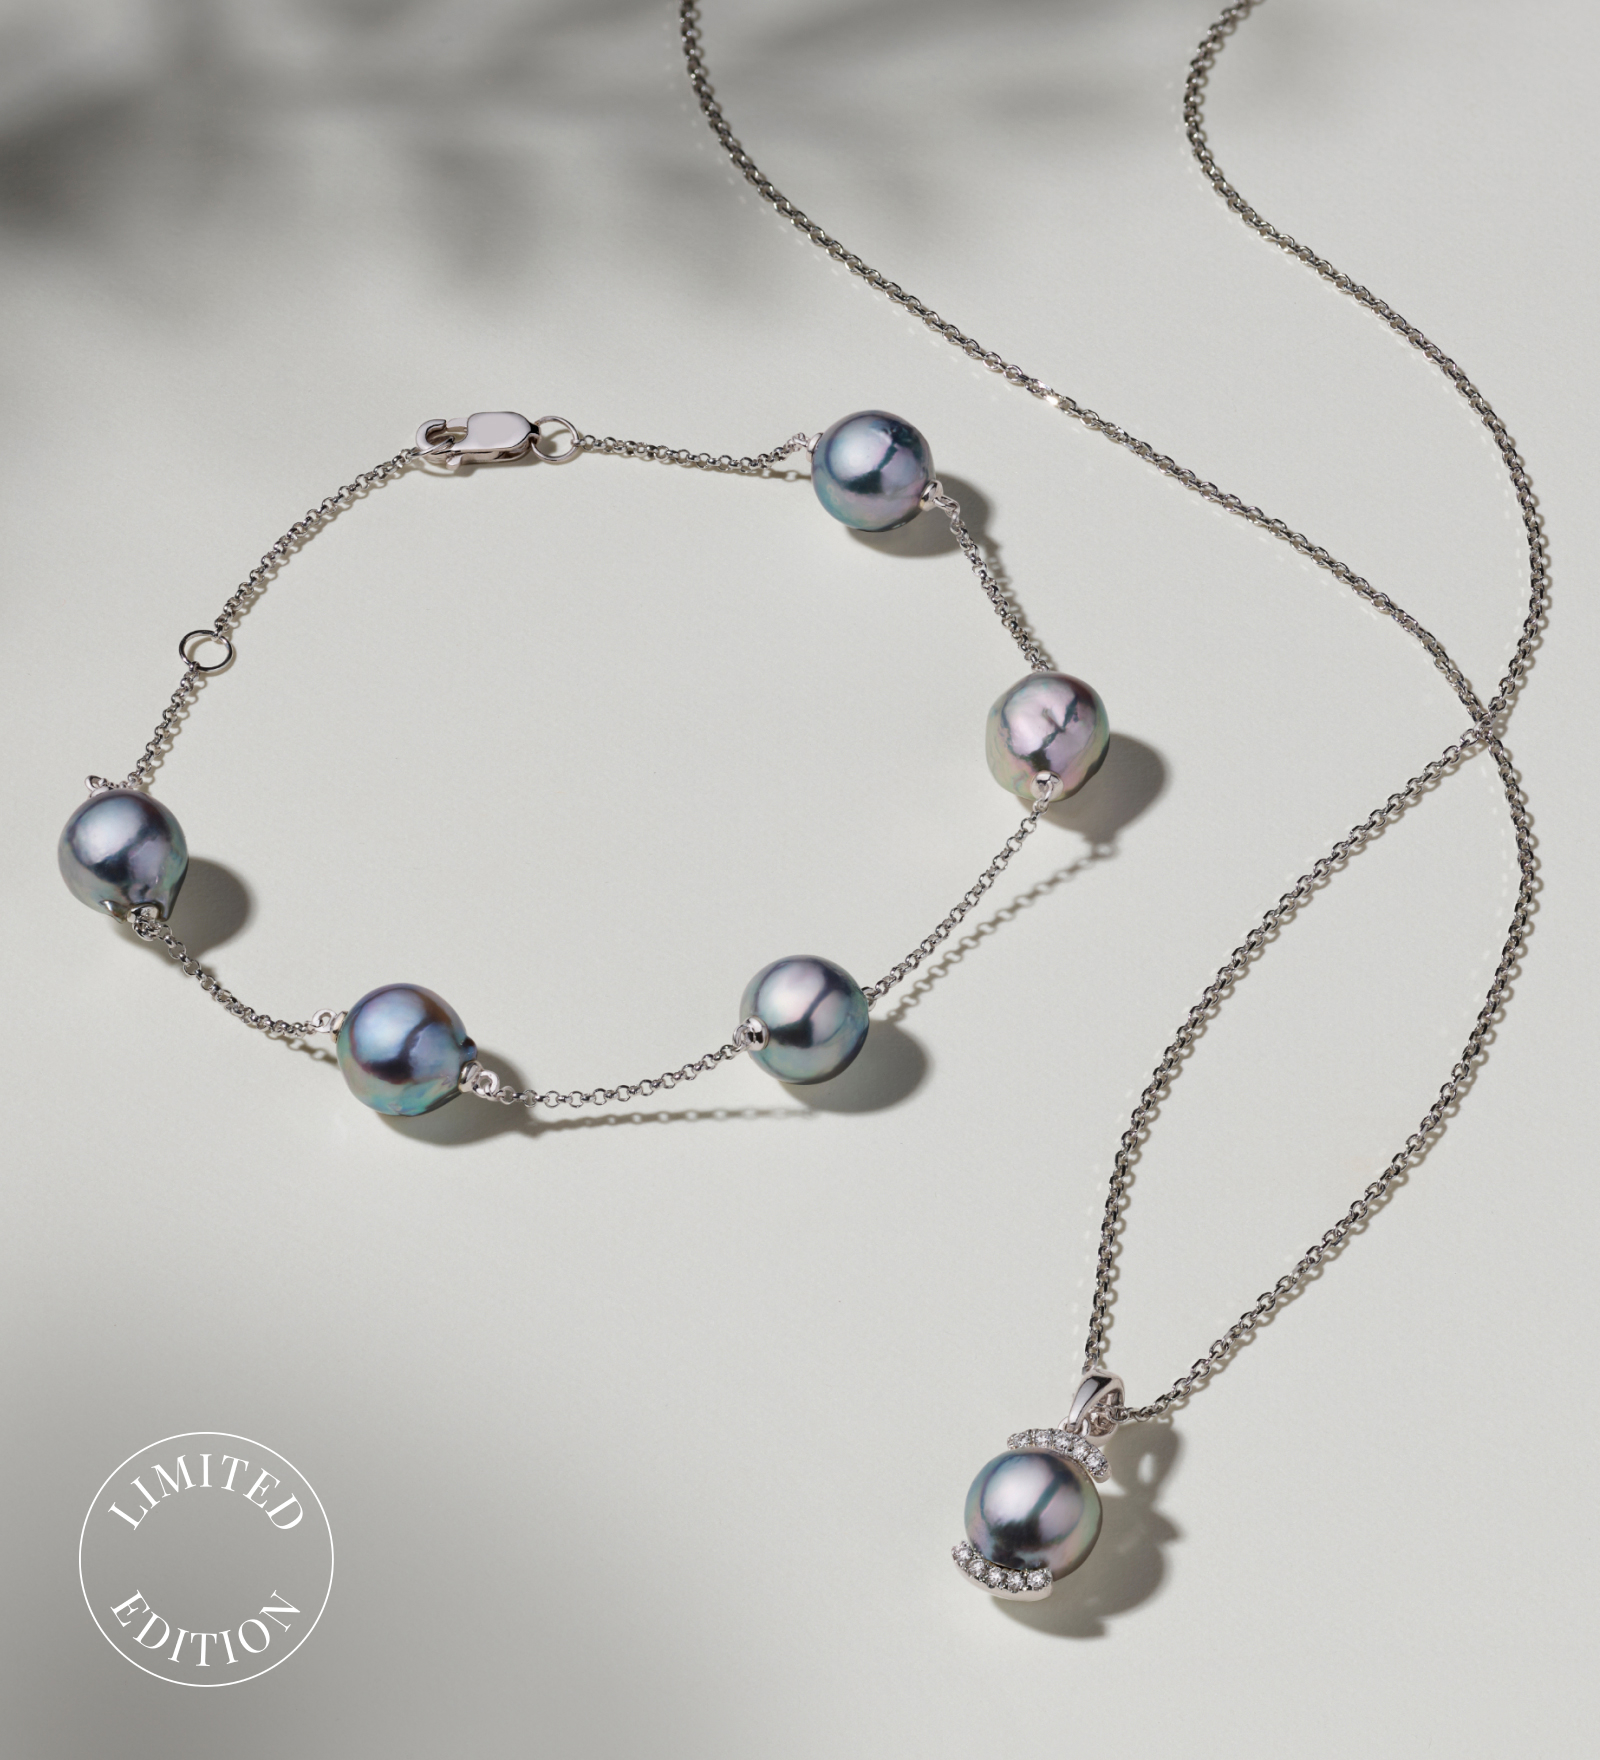 Limited Edition: Introducing the Moonlight Akoya Pearl Collection - We selected these baroque akoya pearls from a new harvest to create extraordinary pieces for our latest Toms Finds collection. Shop Now >